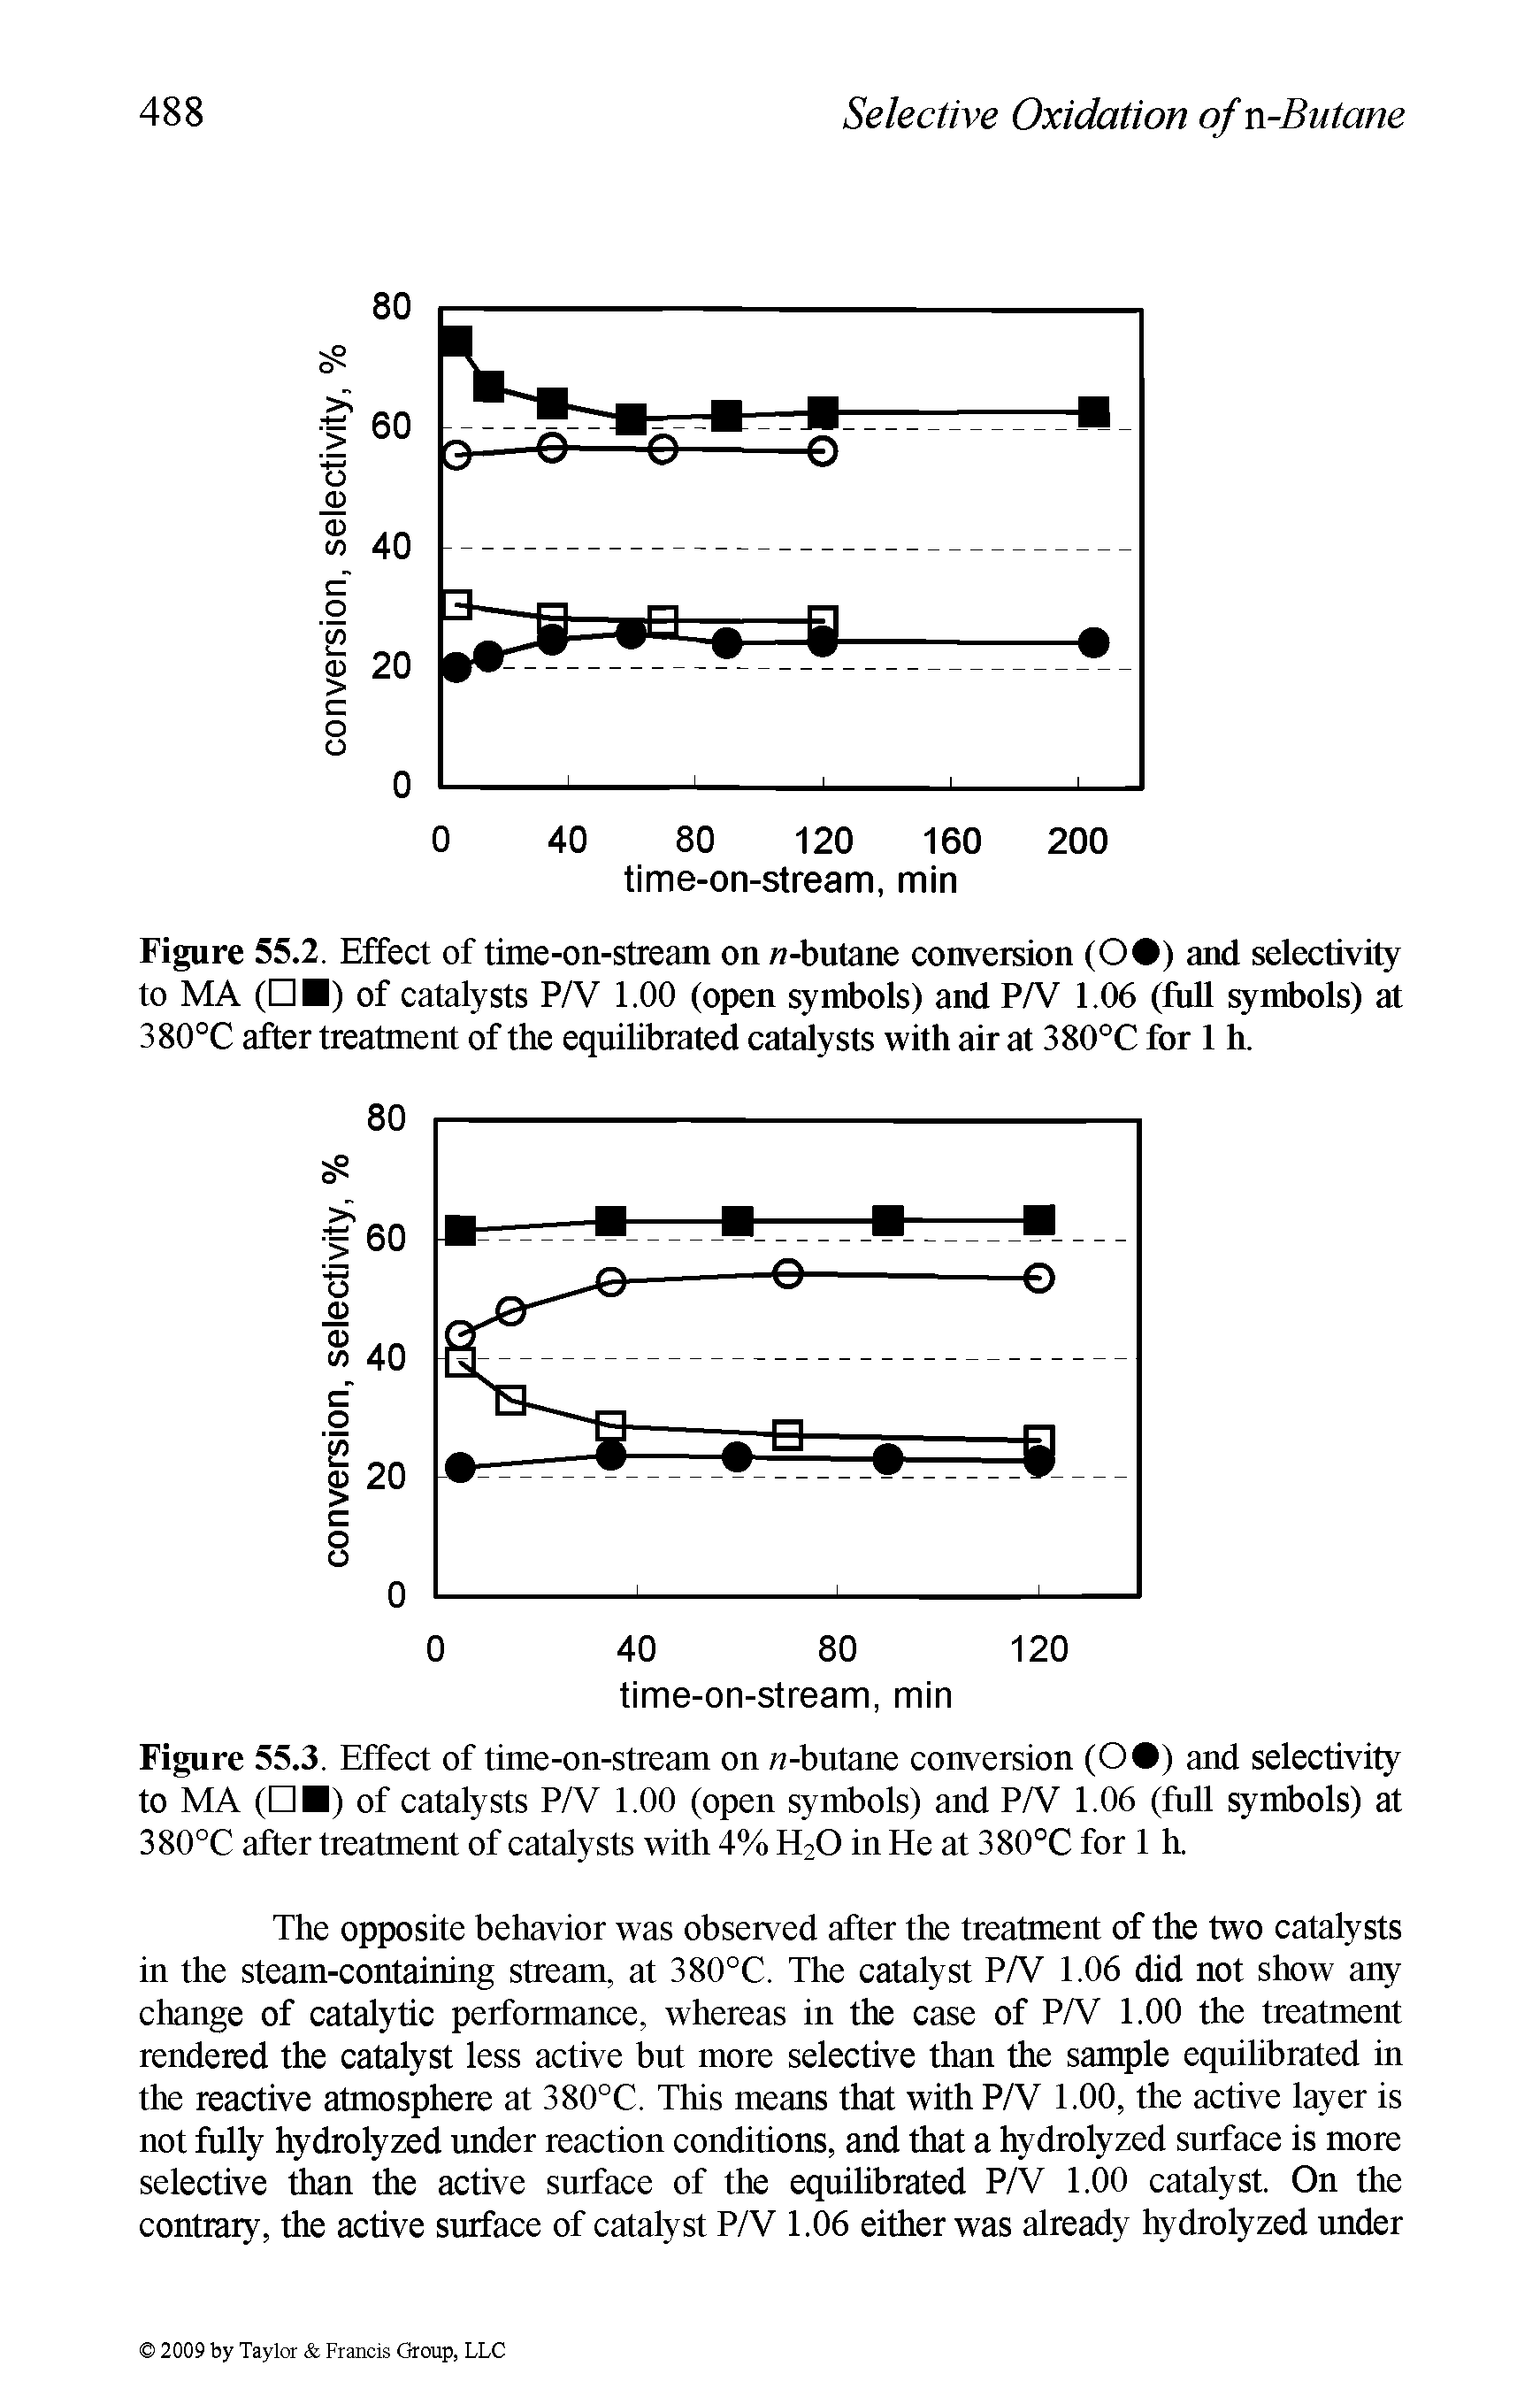 Figure 55.2. Effect of time-on-stream on -butane conversion (O ) and selectivity to MA ( ) of catalysts P/V 1.00 (open symbols) and PA 1.06 (full symbols) at 380°C after treatment of the equilibrated catdysts with air at 380°C for 1 h.